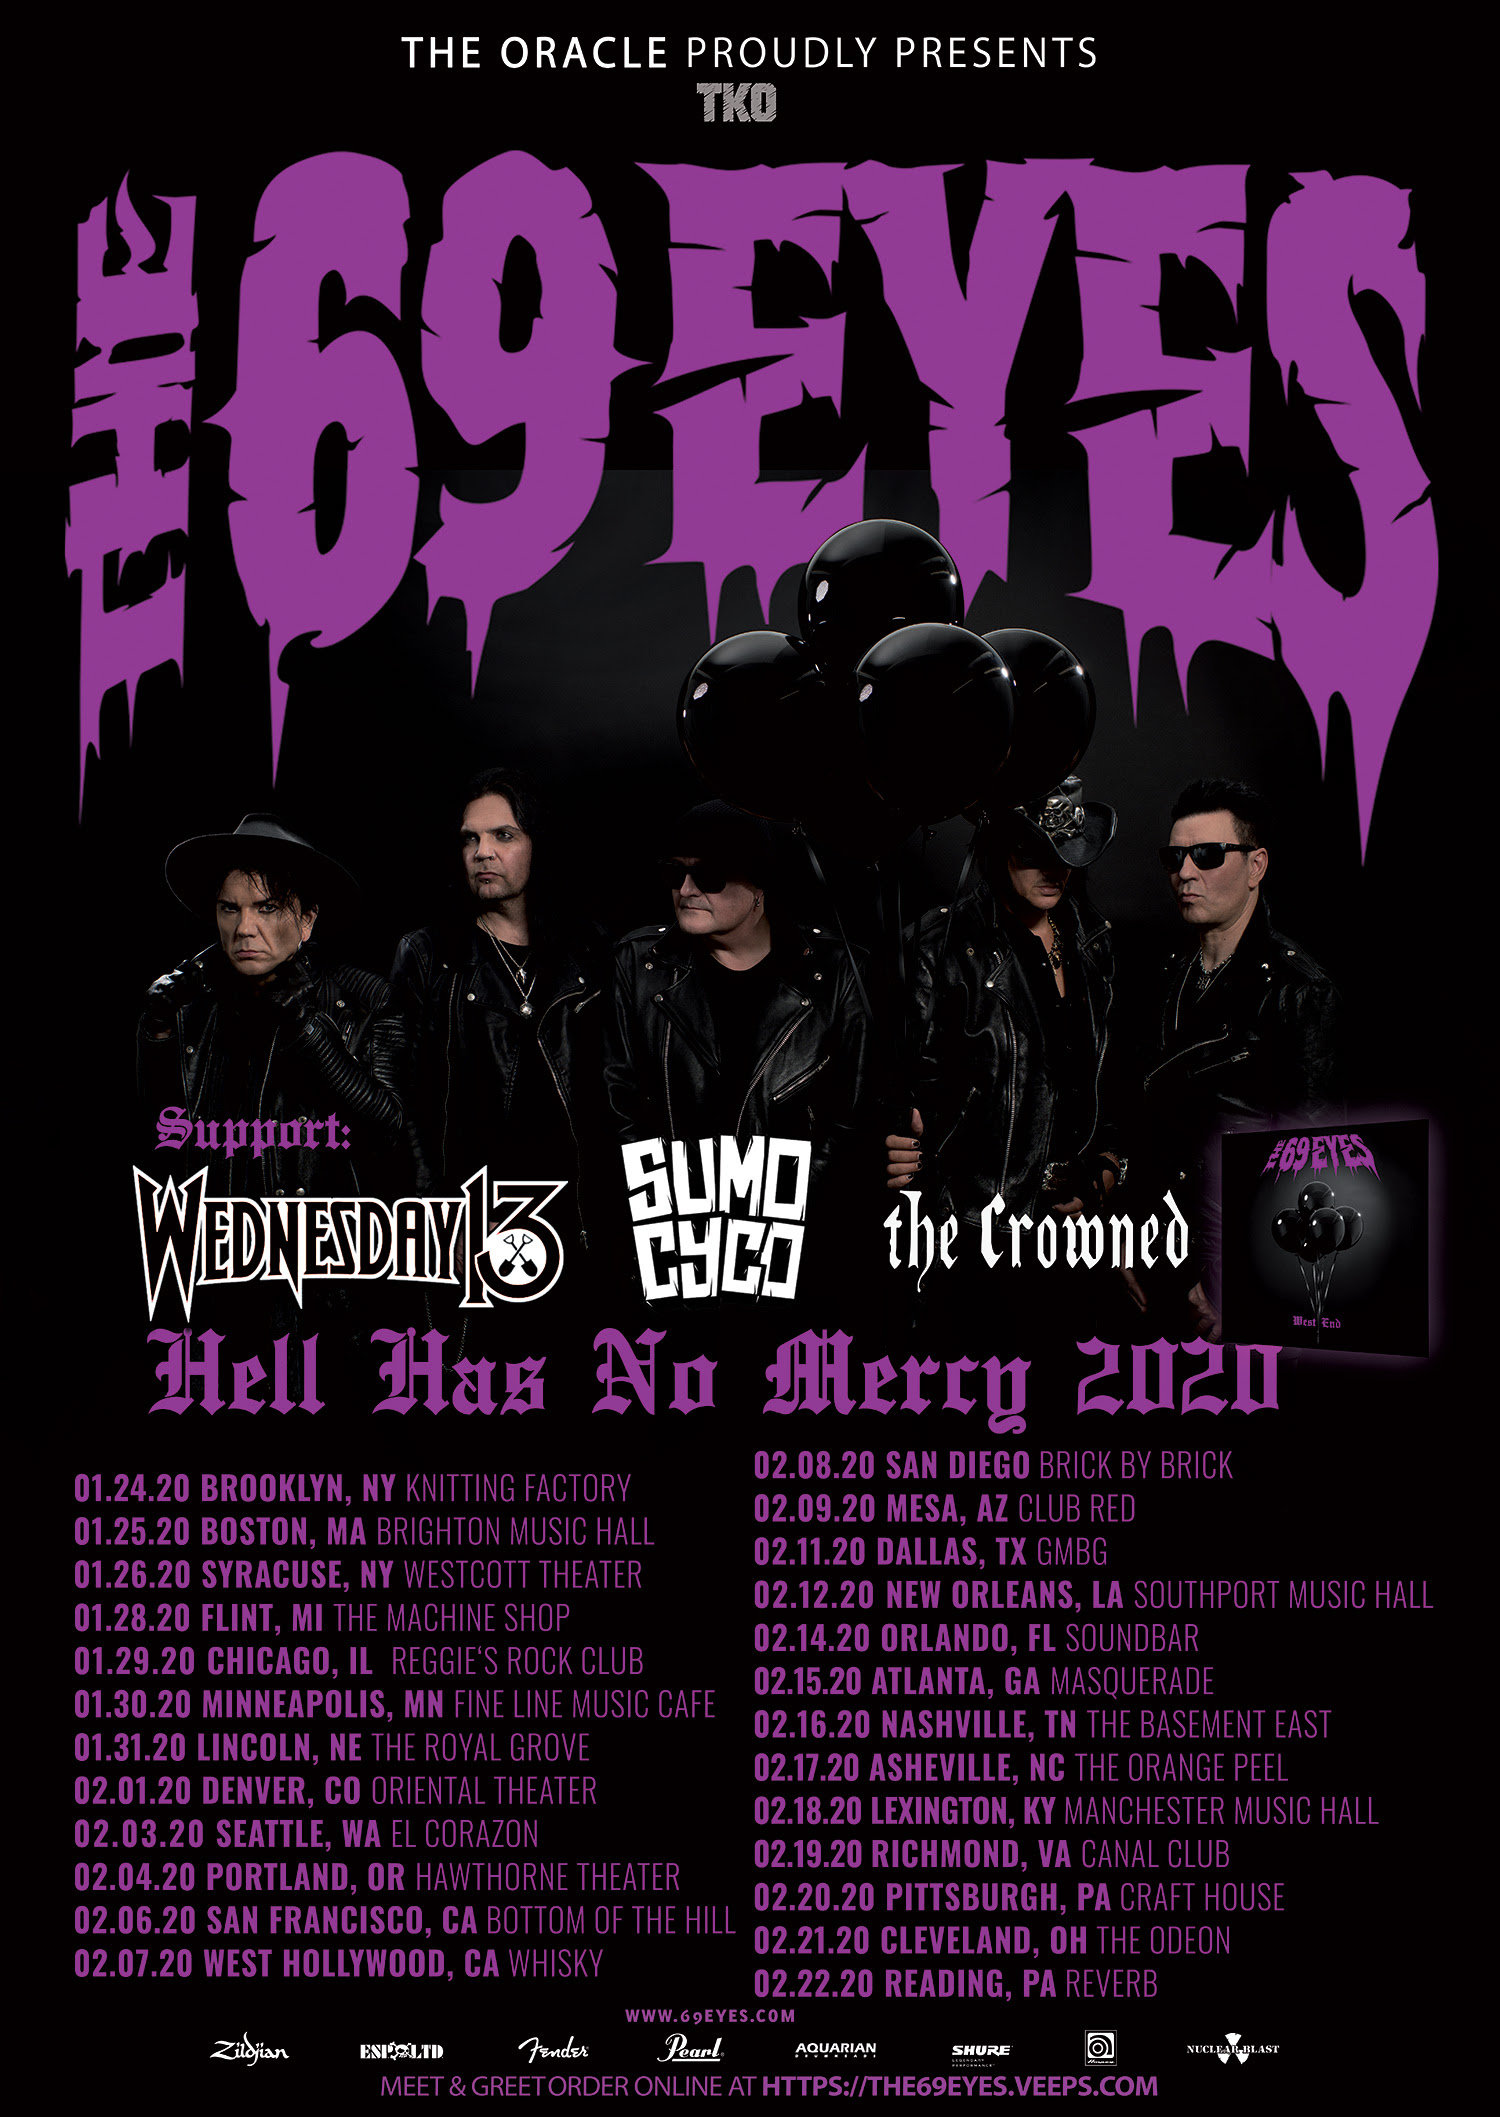 THE 69 EYES Release New Tour Trailer, Watch Here BPM